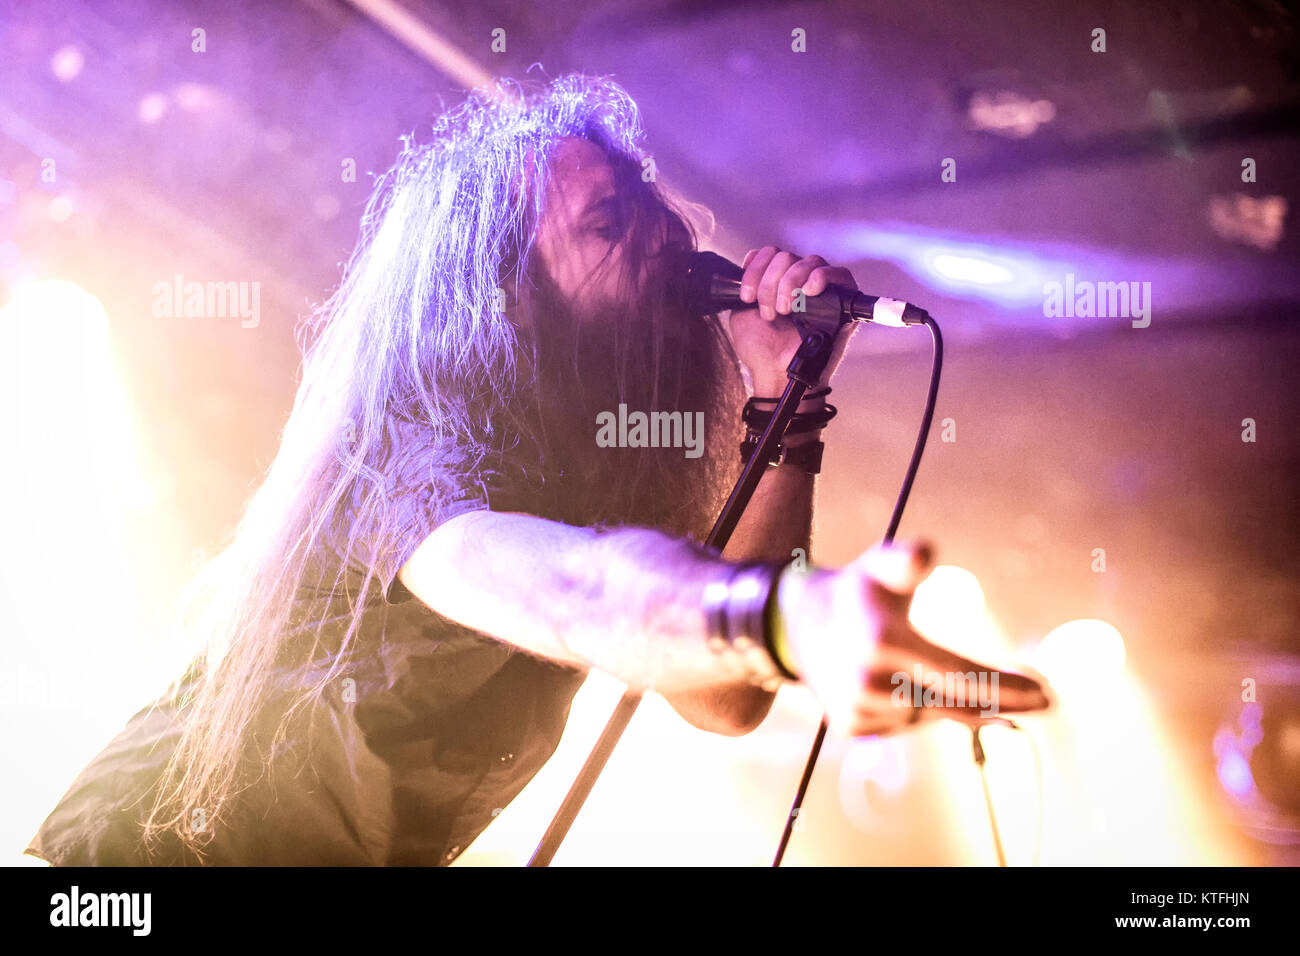 The Italian doom metal band Shores of Null performs a live concert at John Dee as part of the festival Inferno Metal Festival 2016 in Oslo. Here vocalist Davide Straccione is seen live on stage. Norway, 24/03 2016. Stock Photo